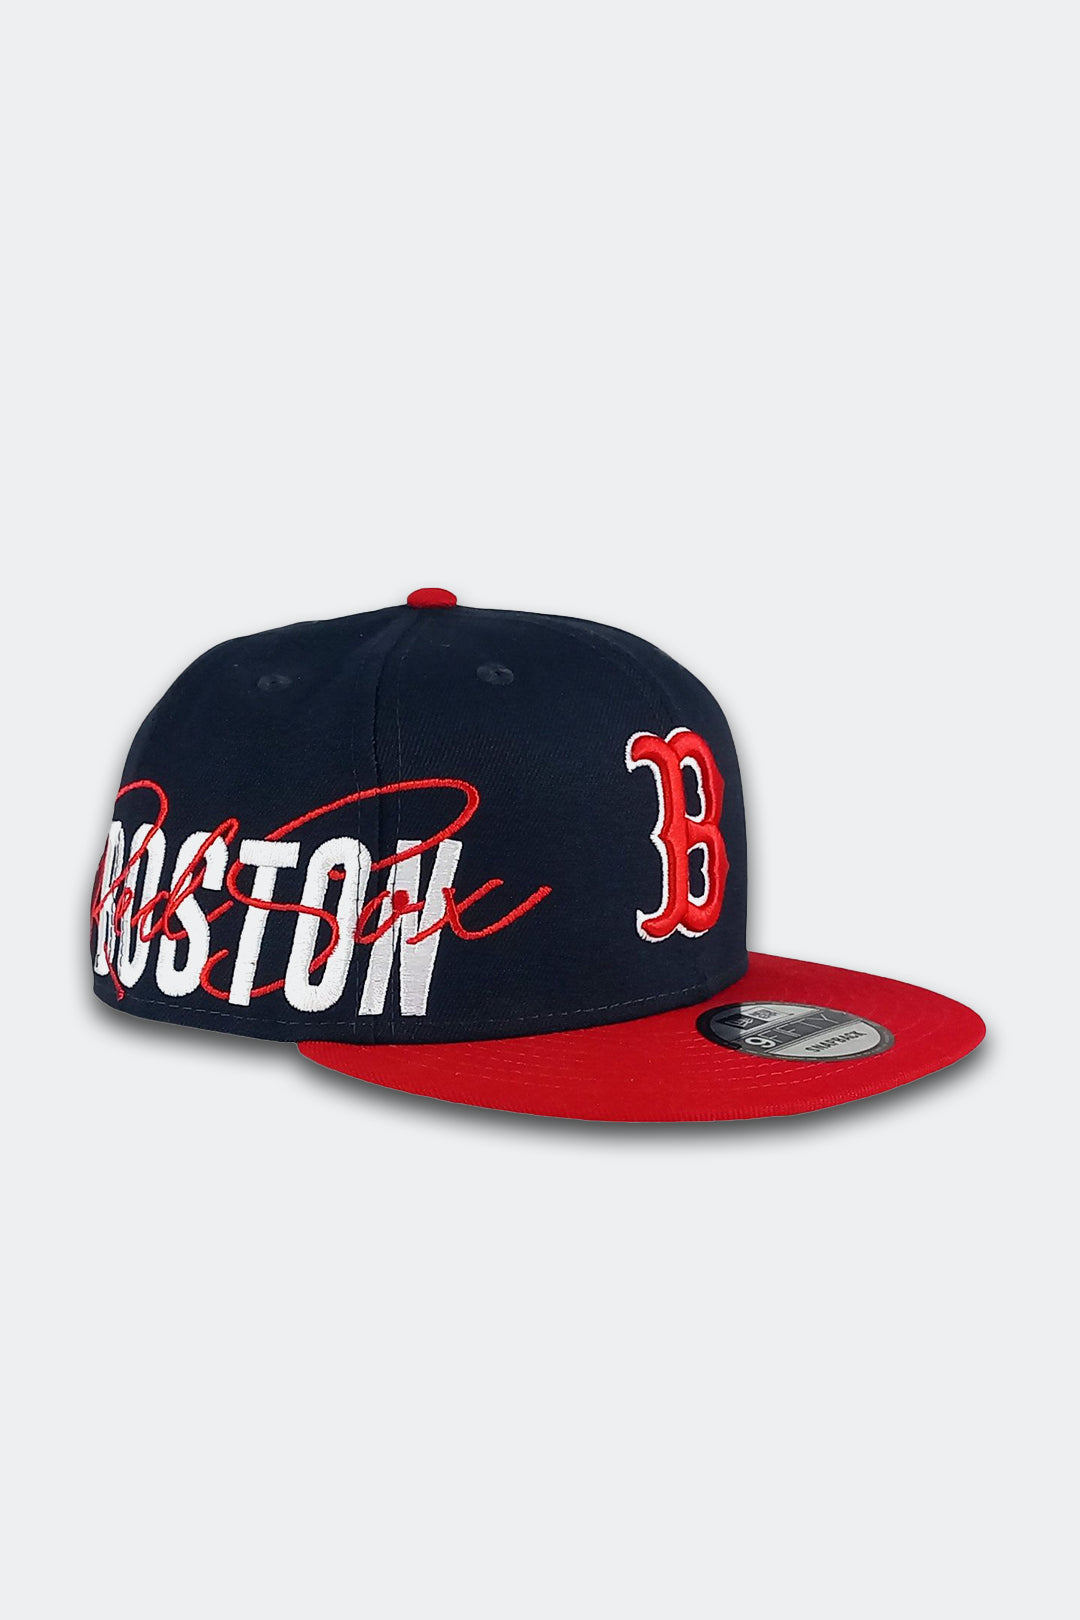 NEW ERA 9FIFTY BOSTON RED SOX "SIDE FONT" - HYPE